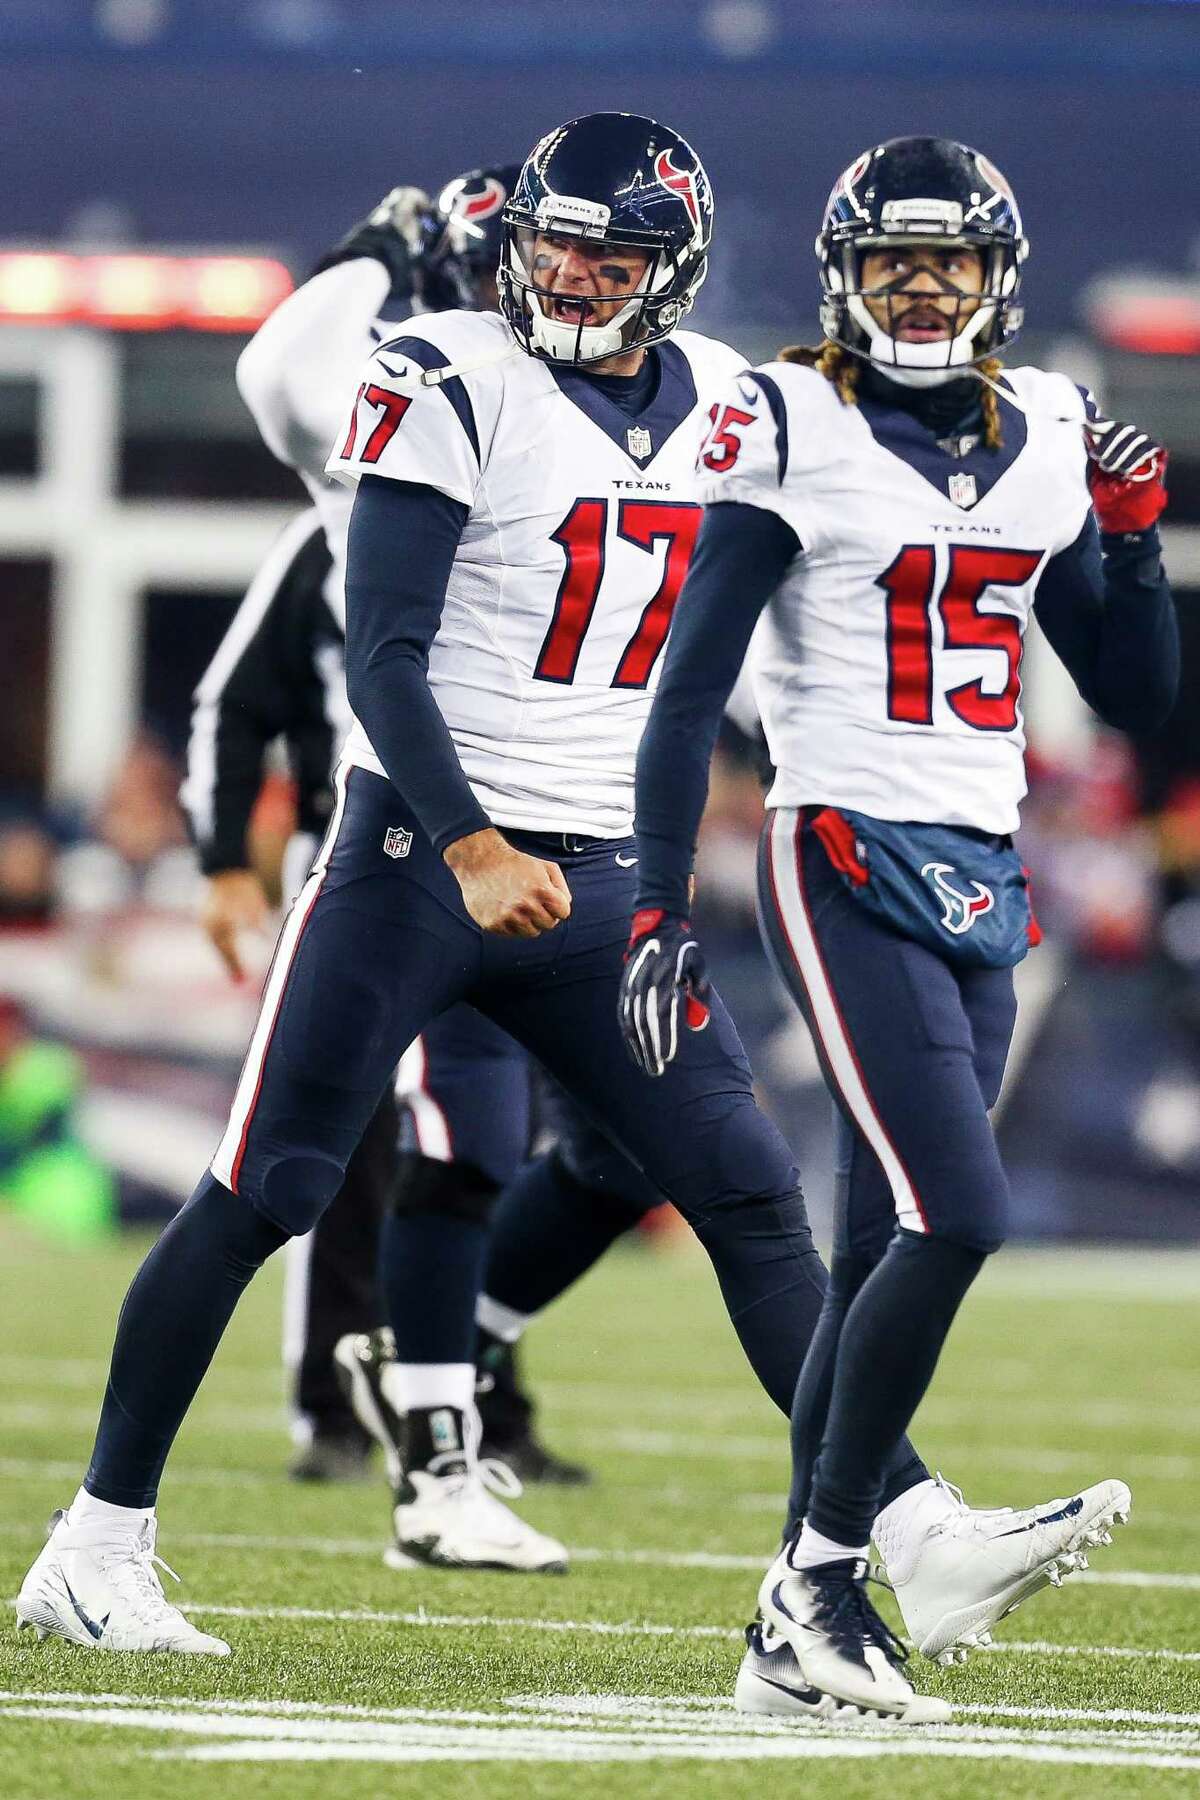 Texans quarterback Brock Osweiler yells as he walks off the field following an interception during the fourth quarter of the AFC Divisional Playoff game at Gillette Stadium on Saturday night.